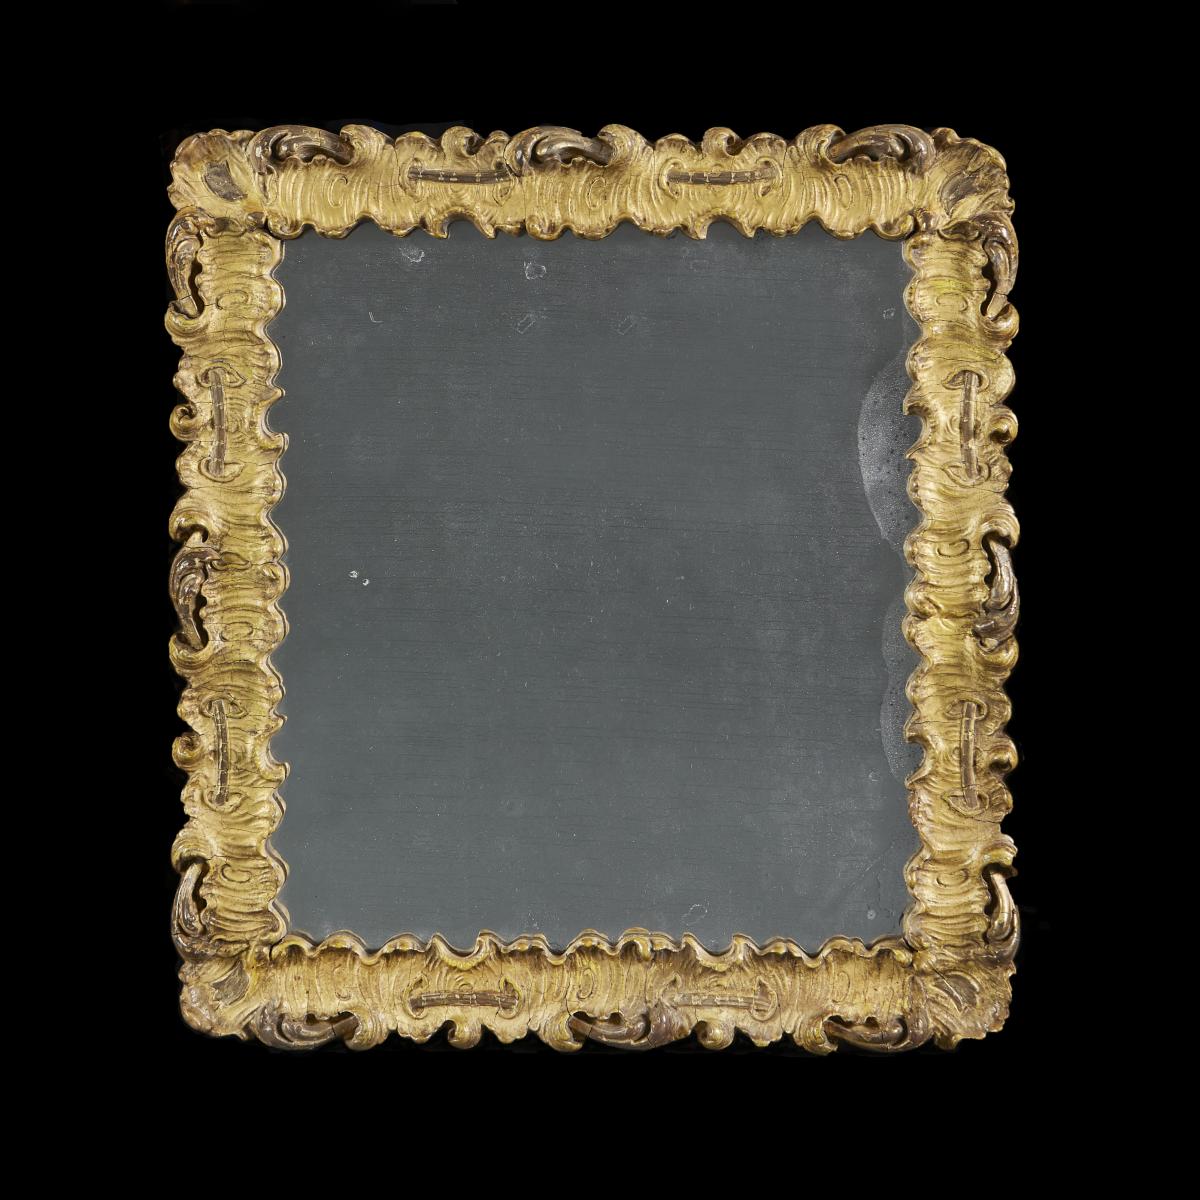 A Mid 18th Century Rocaille Mirror